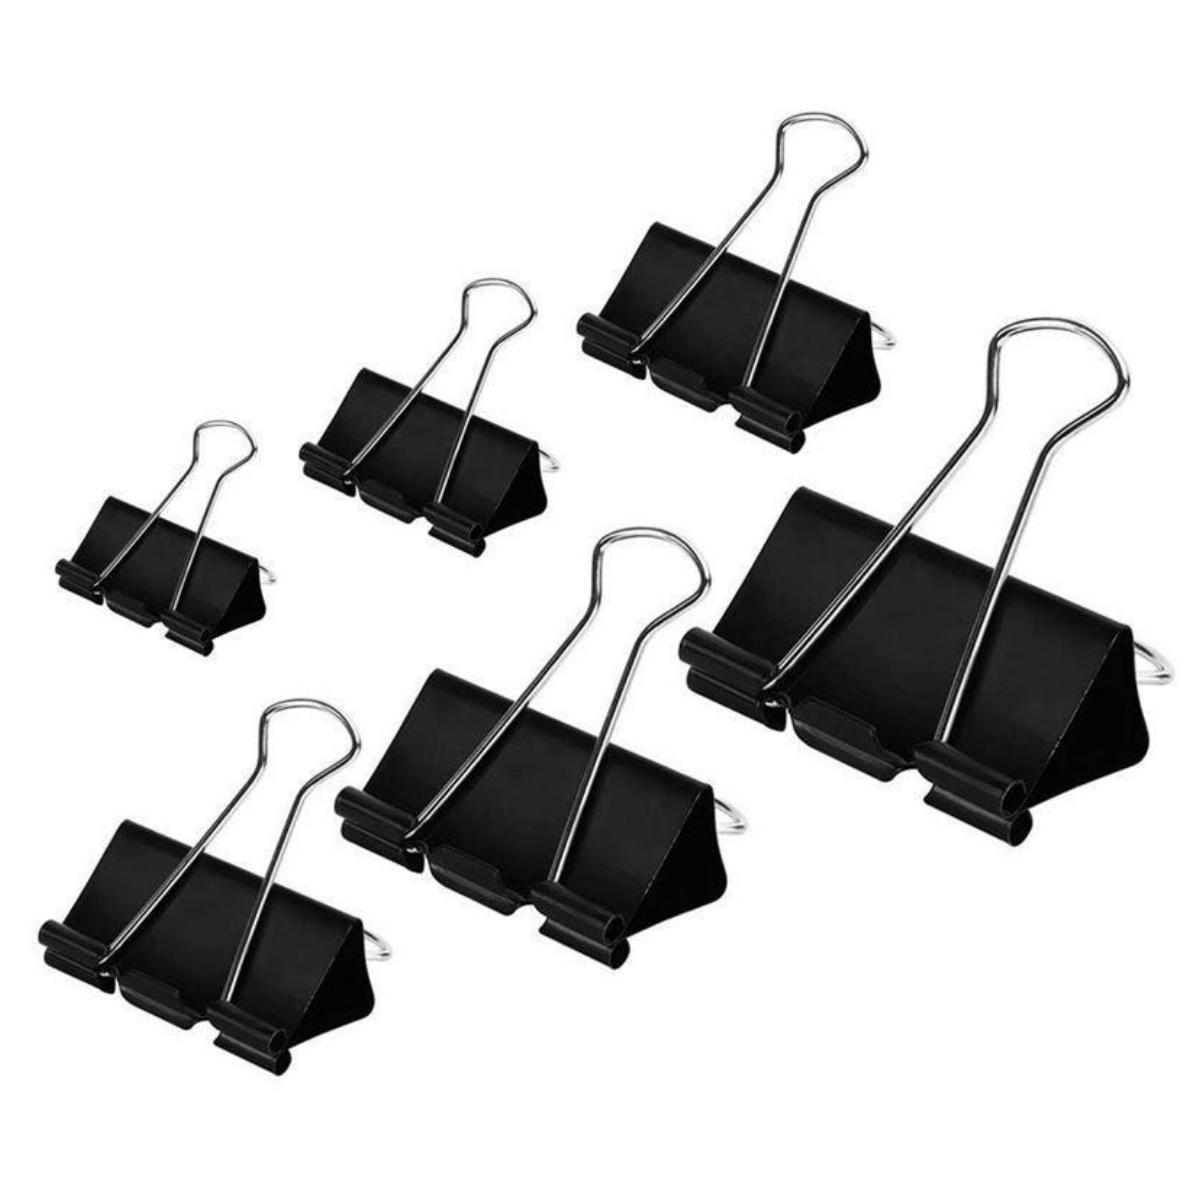 Binder Clips - All Sizes (Pack of 12) - Monaf Stores